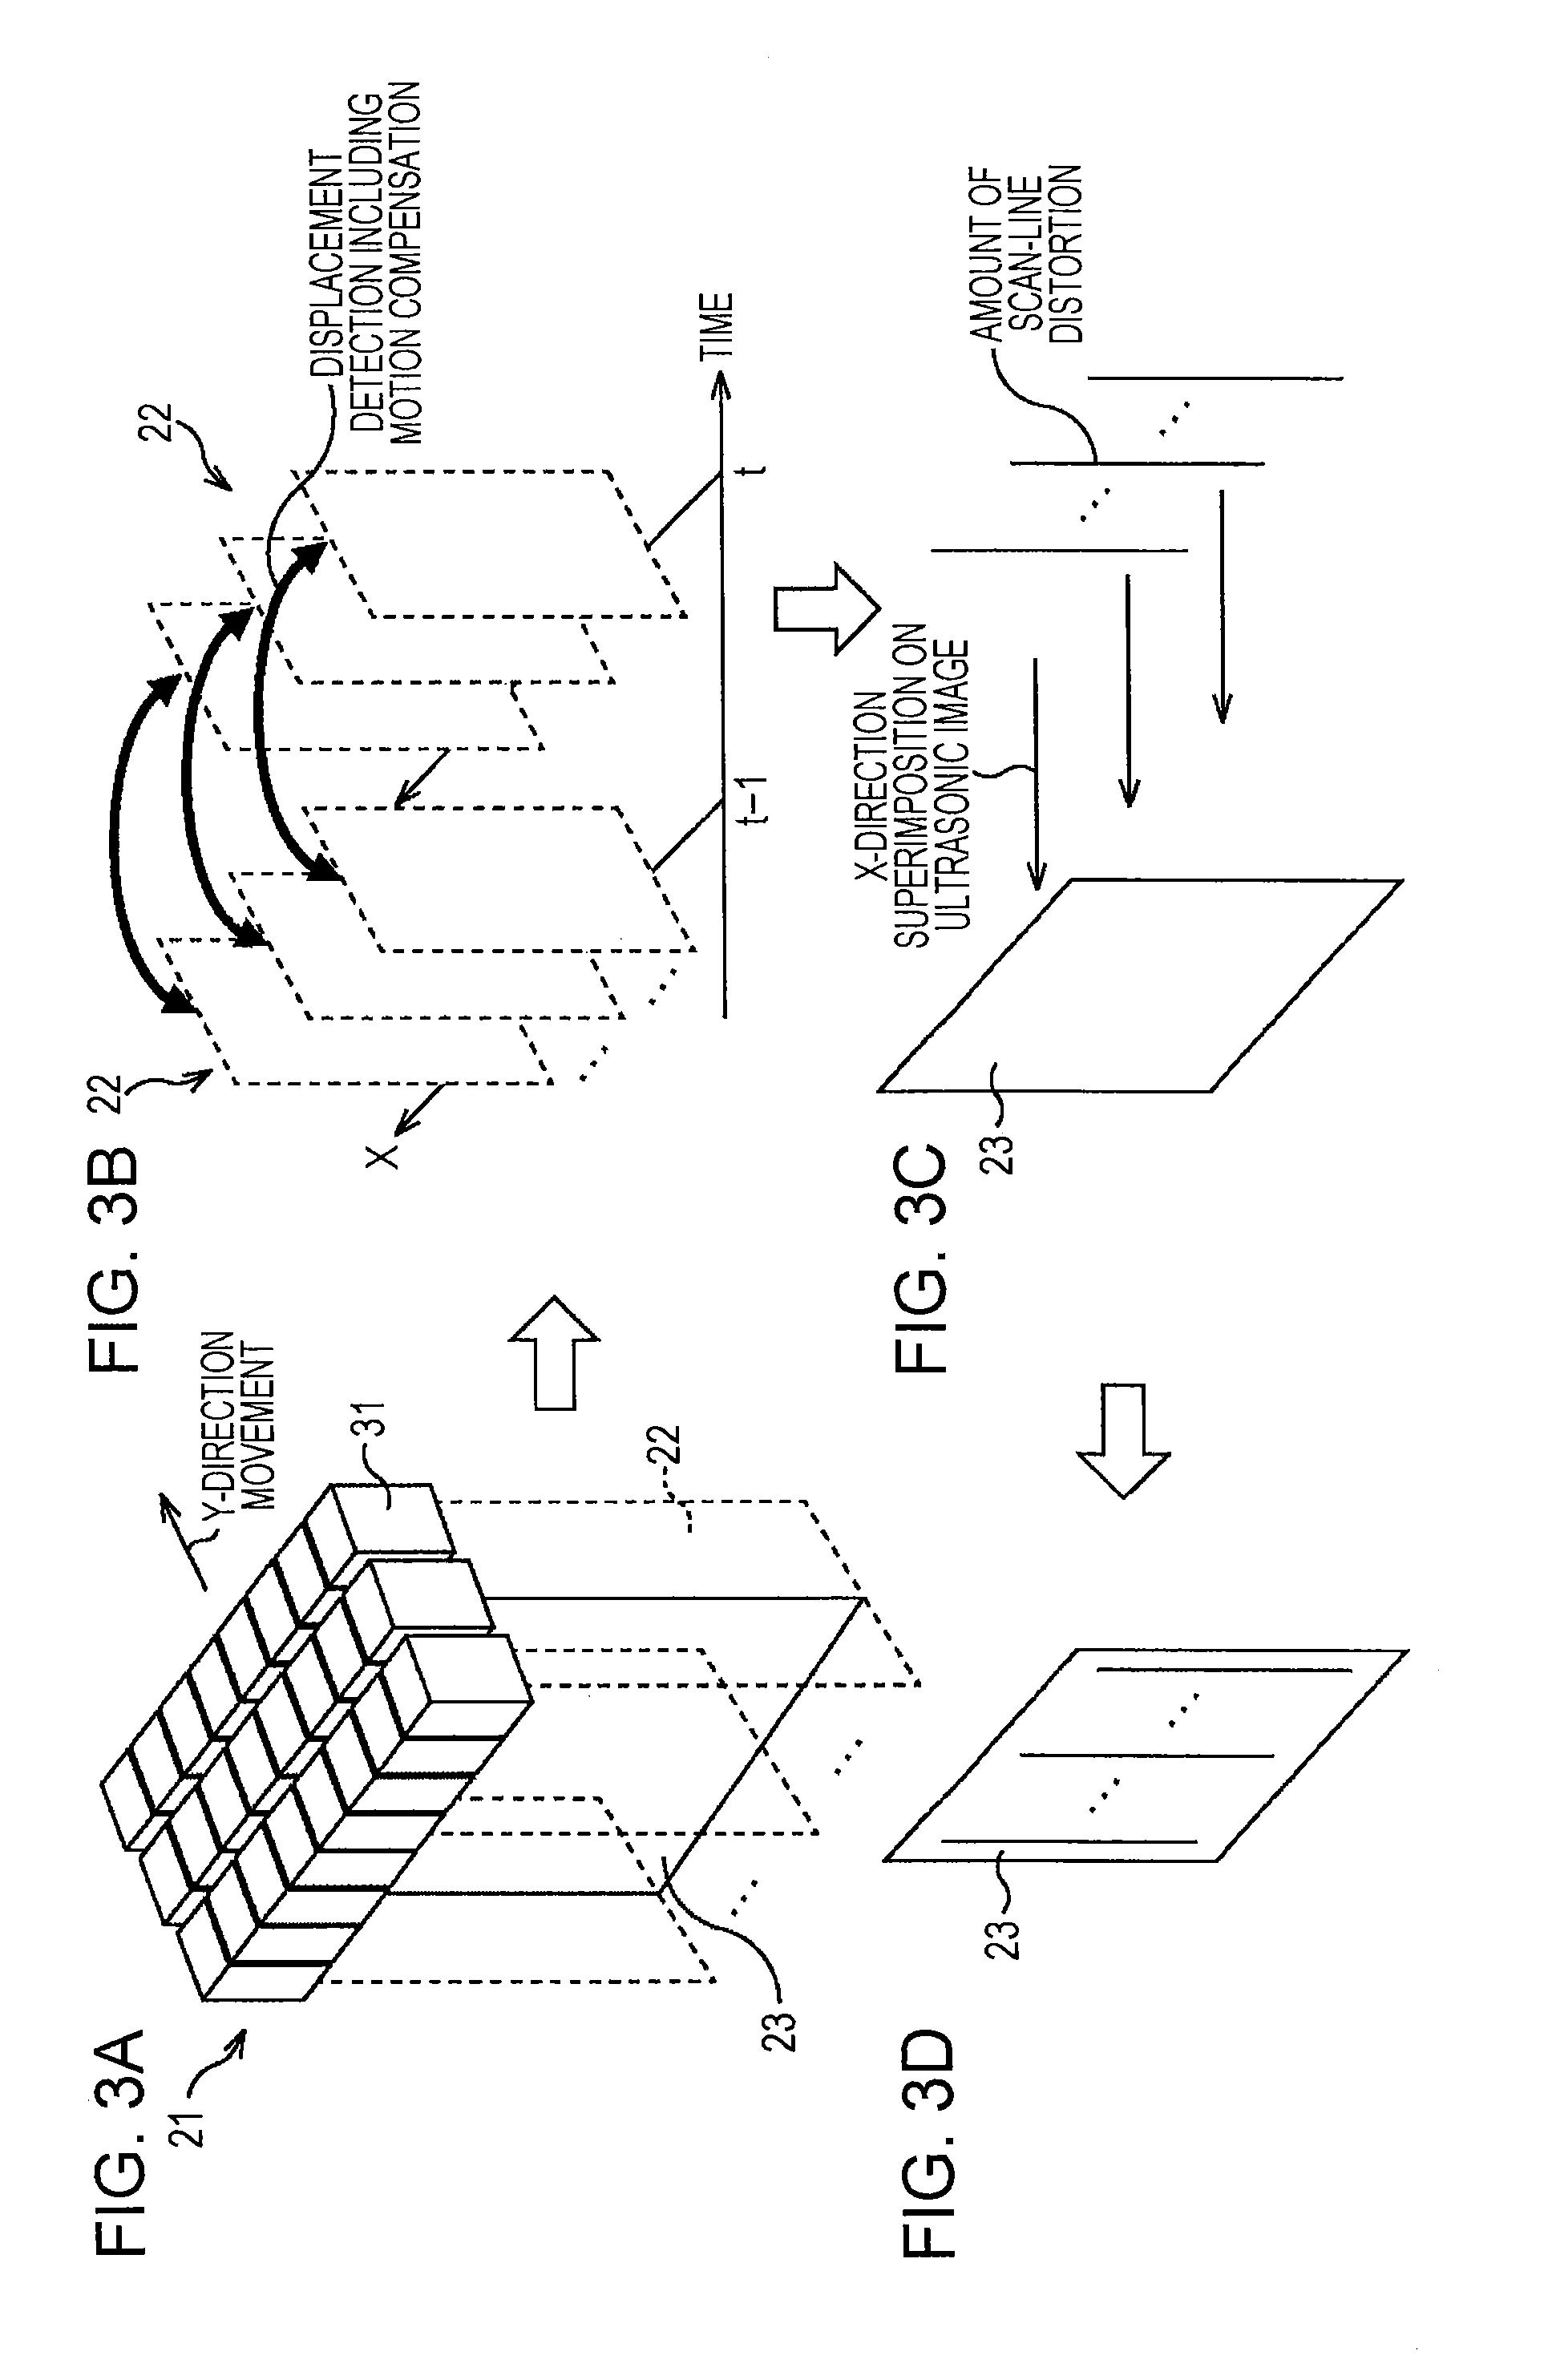 Image processing apparatus and method, and ultrasonic diagnostic apparatus